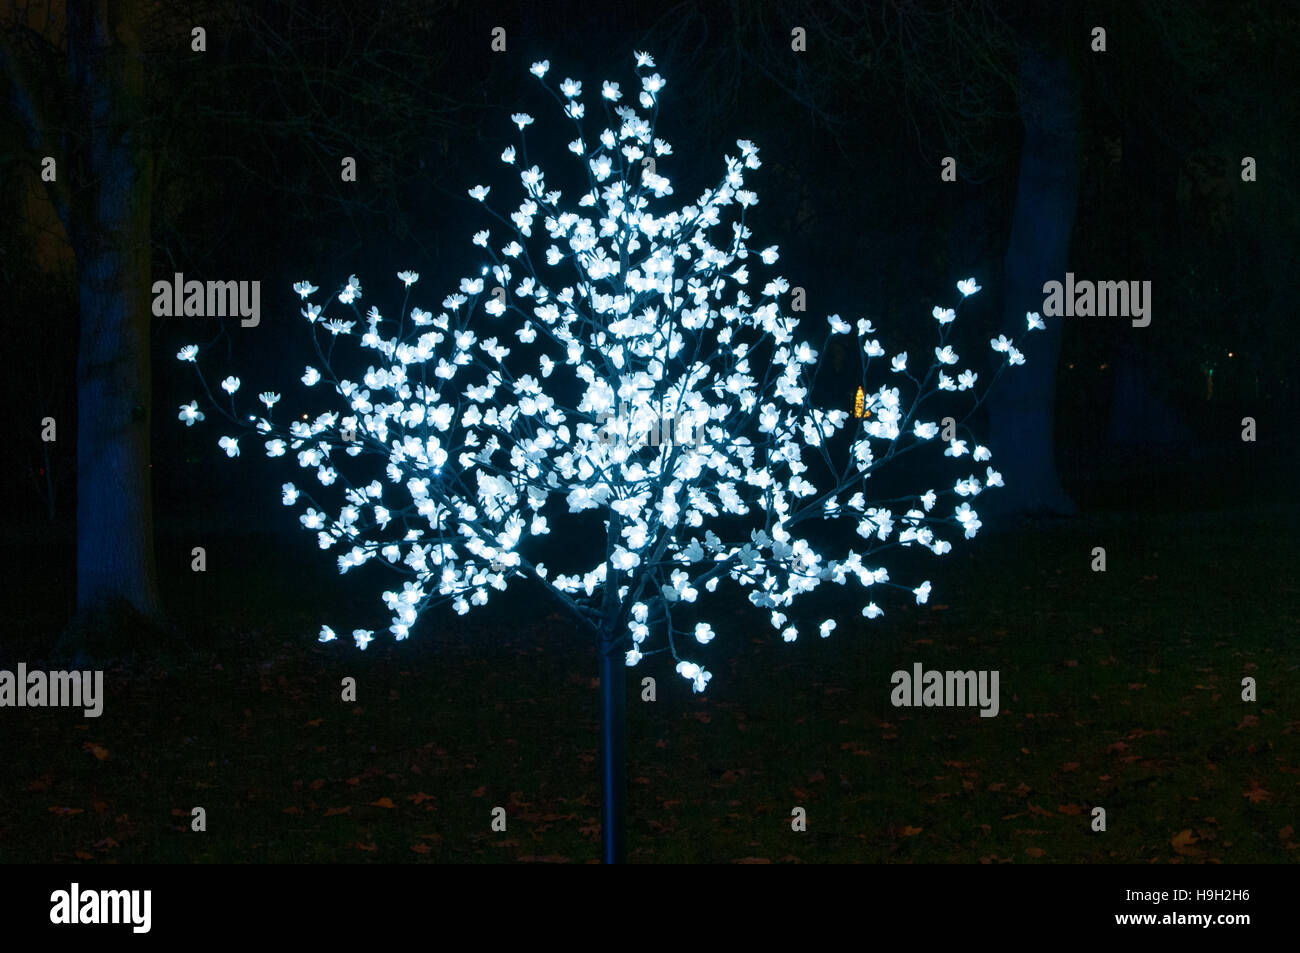 London, UK. 22nd Nov, 2016. An illuminated tree at Christmas at Kew, London. More than 60,000 lights light up the trees, plants and gardens. The trail is more than a mile long and includes artworks from both UK and international artists and designers. The show opens 23rd November 2016 and closes 2nd January 2017. Credit:  Tricia de Courcy Ling/Alamy Live News Stock Photo